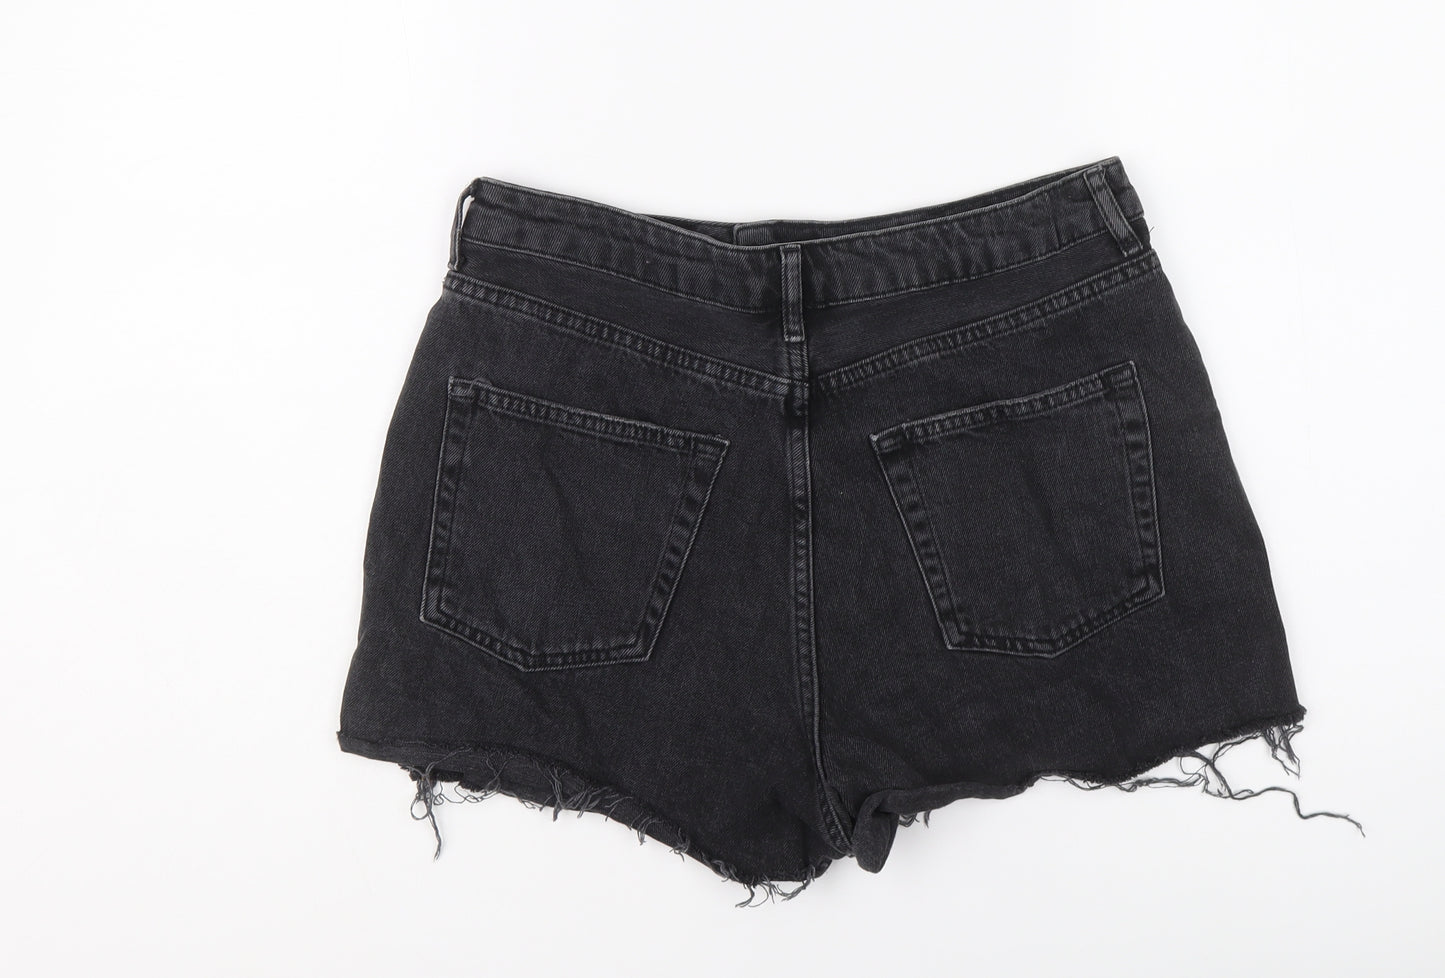 Topshop Womens Black Cotton Hot Pants Shorts Size 12 L3 in Regular Button - Distressed